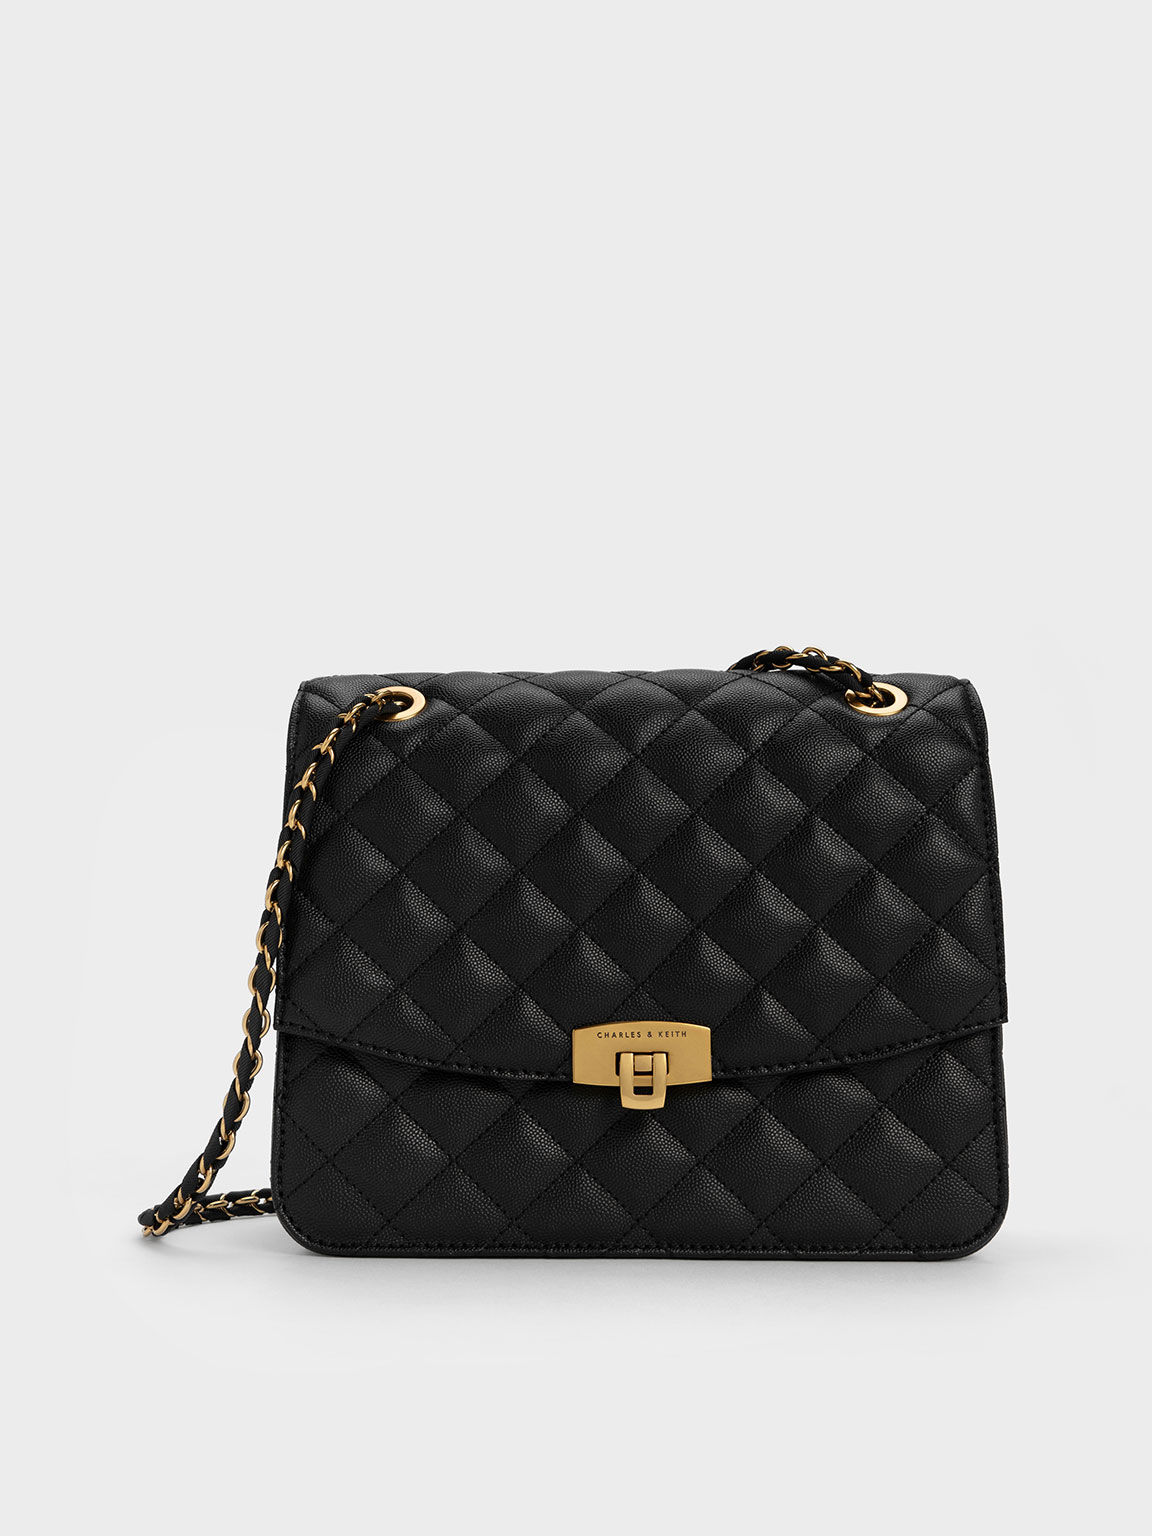 Black Quilted Chain Strap Bag - CHARLES & KEITH SG